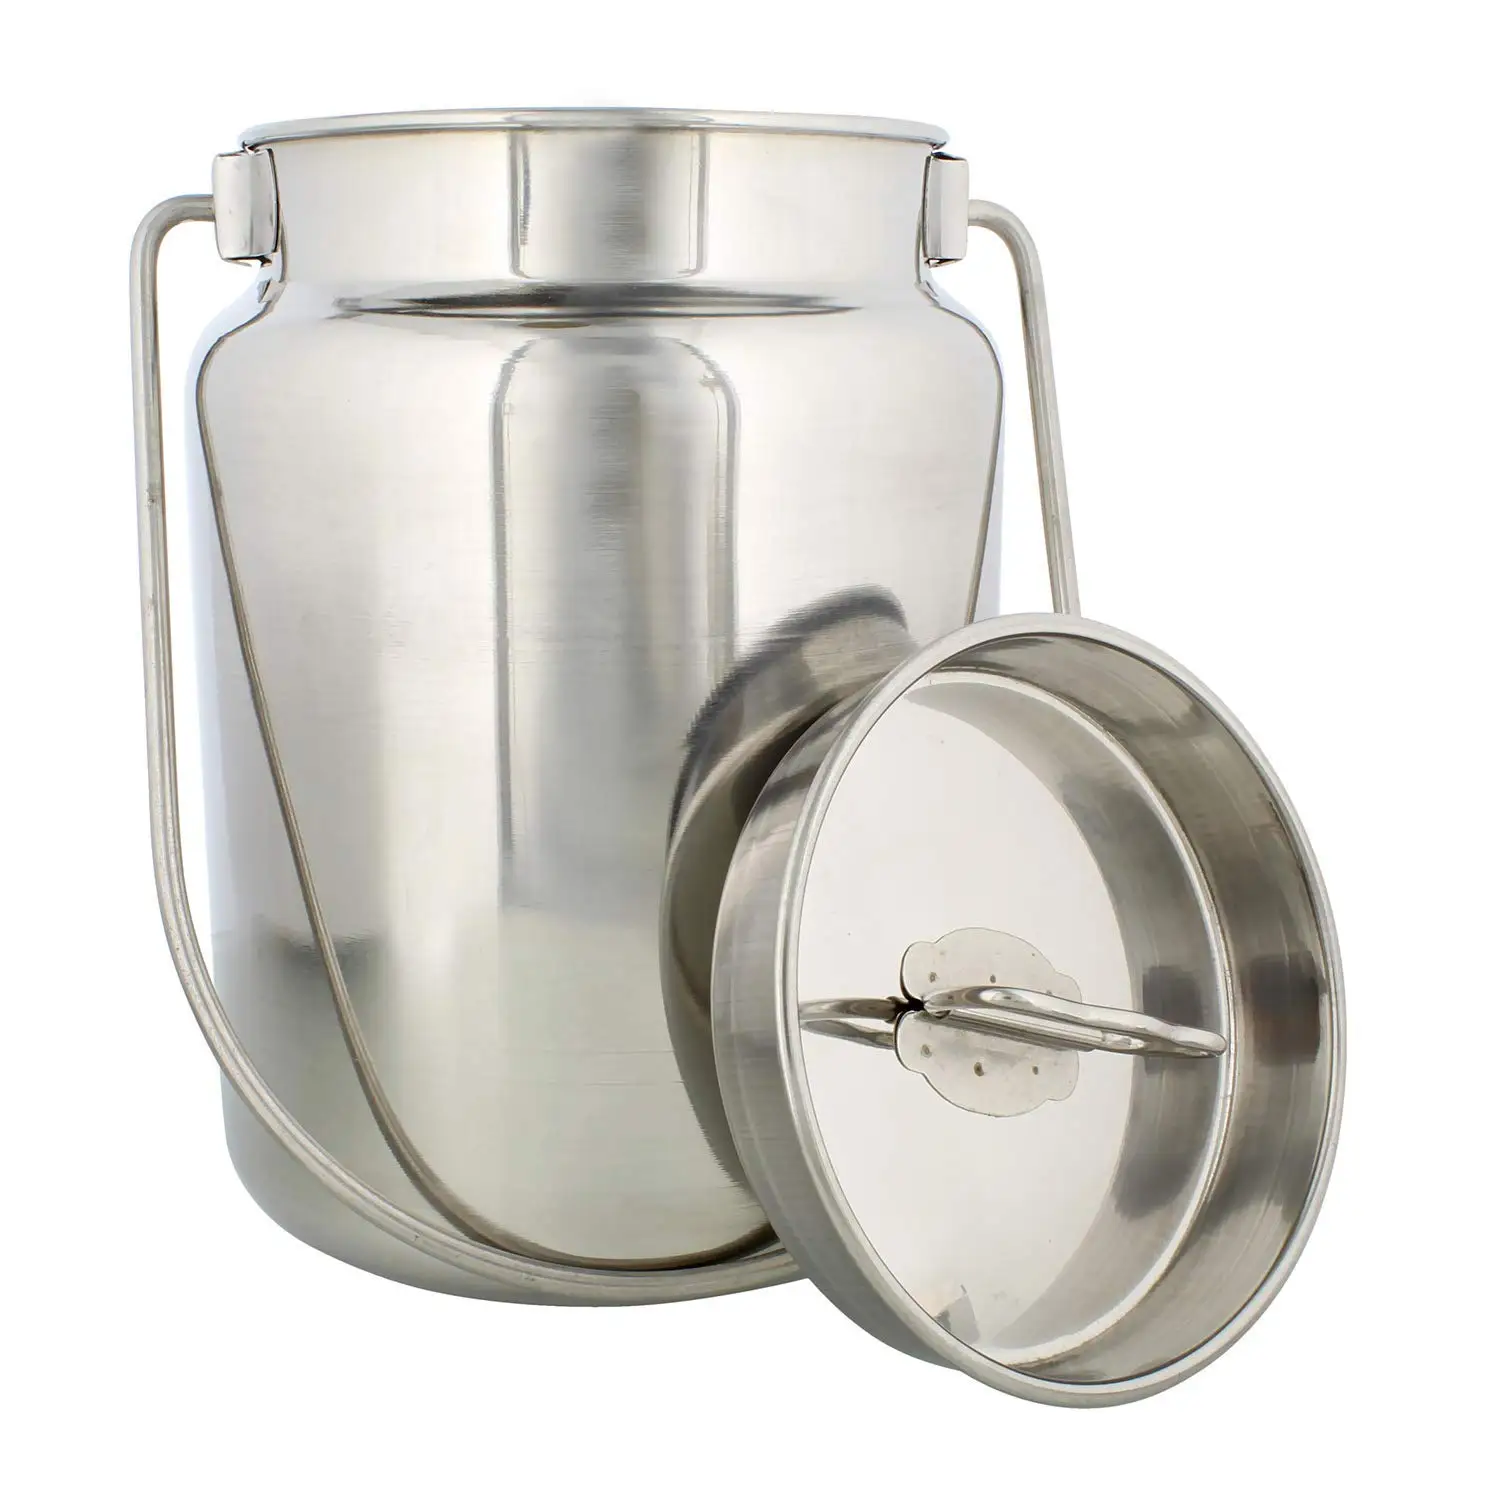 Cheap 15 Gallon Stainless Steel Milk Can Find 15 Gallon Stainless Steel Milk Can Deals On Line At Alibaba Com